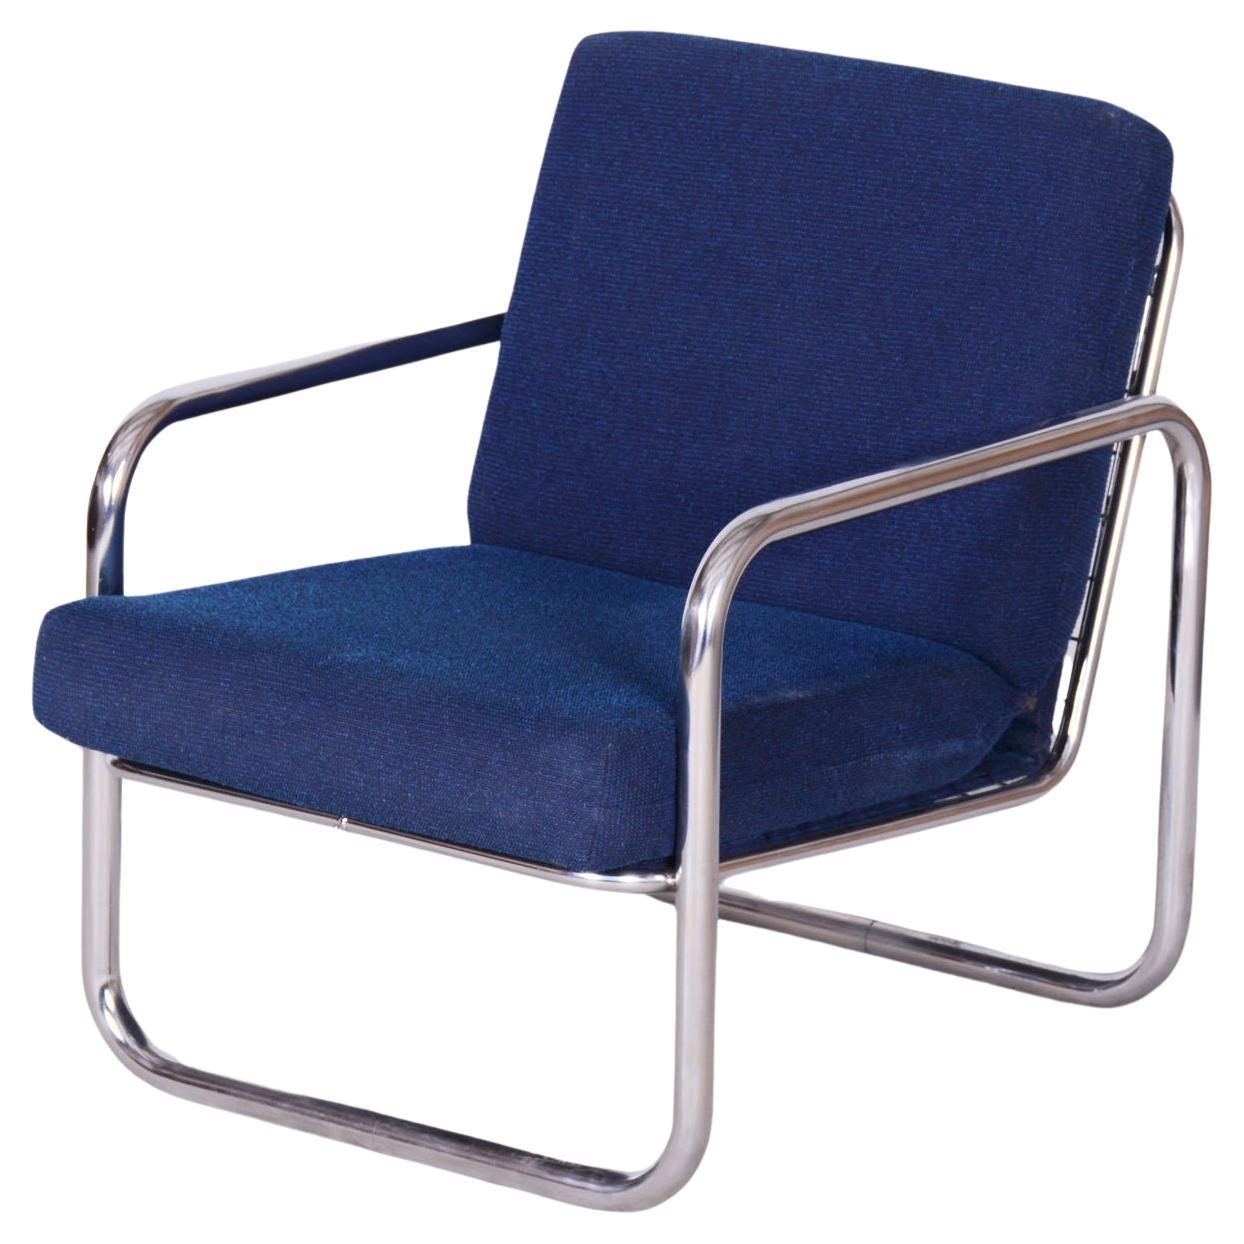 Original Bauhaus Armchair, Chrome-Plated Steel, Cleaned Upholstery, Czech, 1950s For Sale